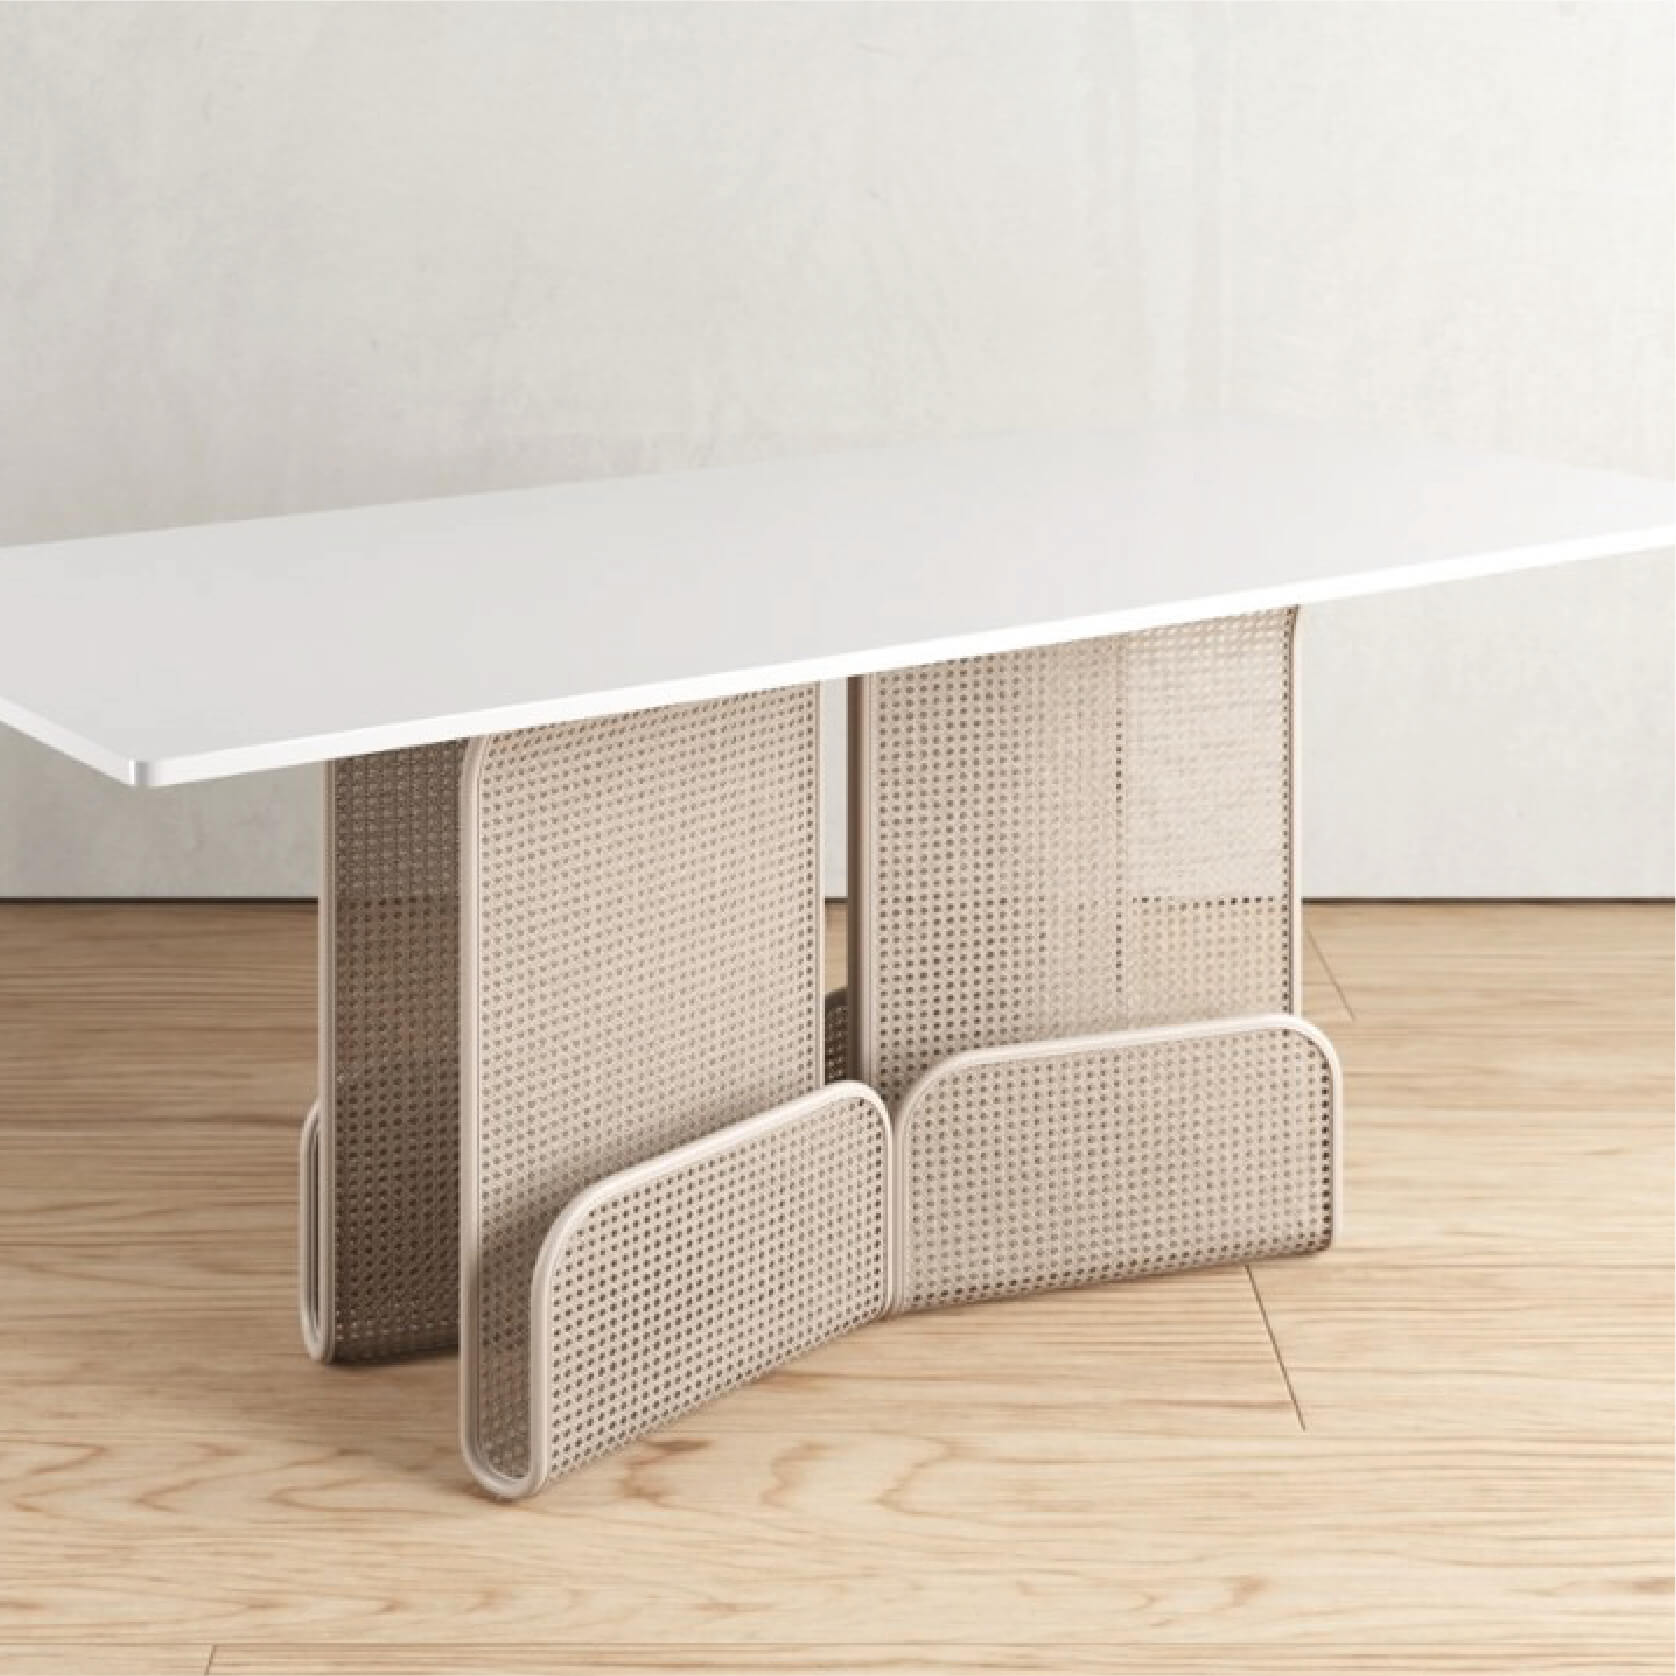 Folding Table by Calfurn - Design Commune Feature